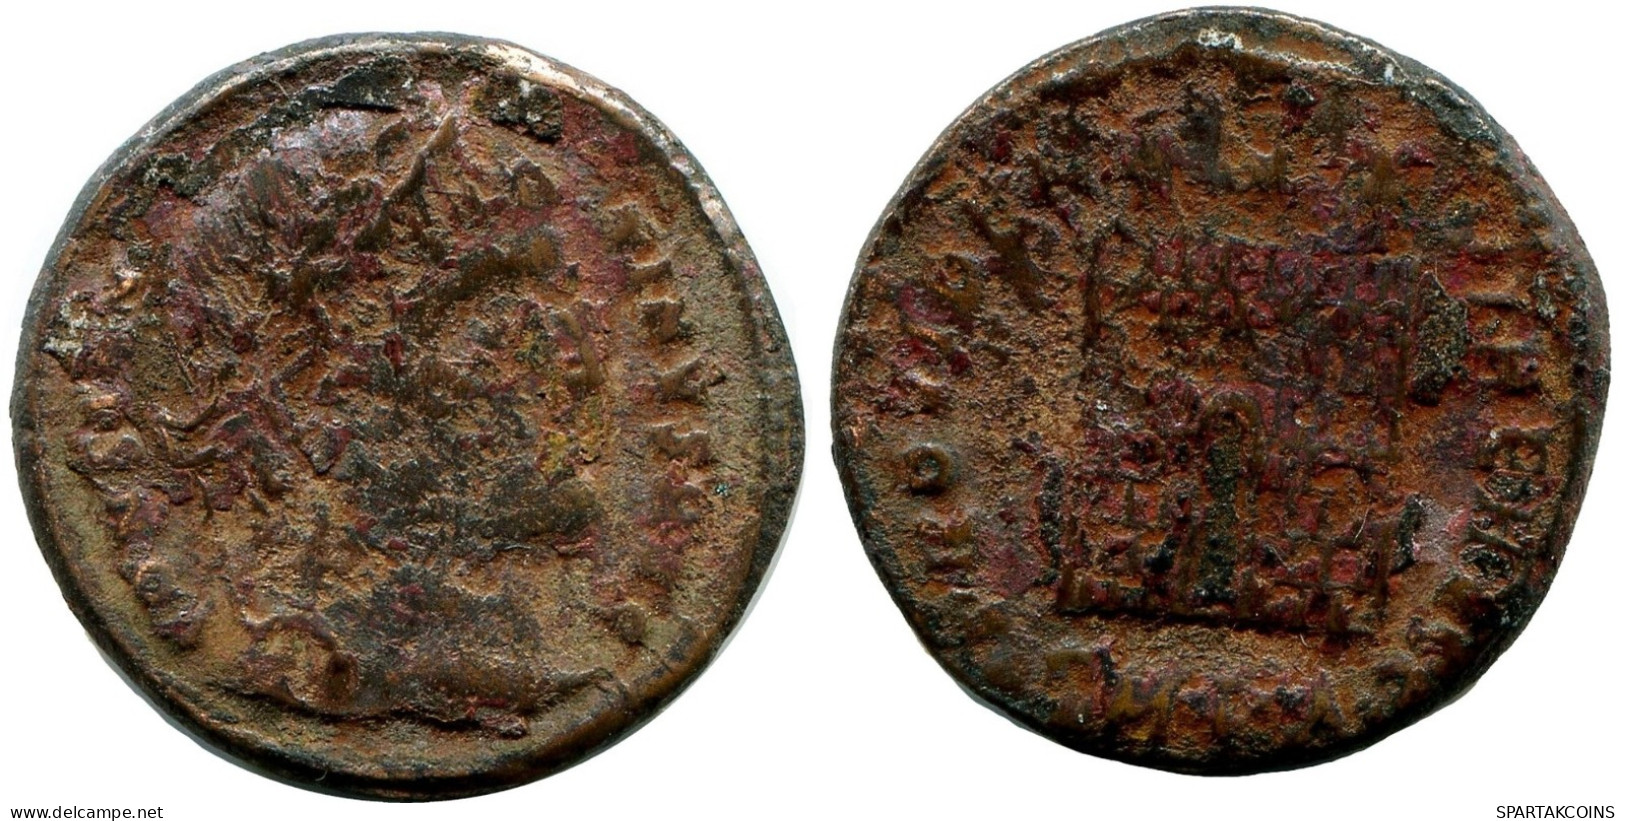 CONSTANTINE I MINTED IN CYZICUS FROM THE ROYAL ONTARIO MUSEUM #ANC11027.14.U.A - L'Empire Chrétien (307 à 363)